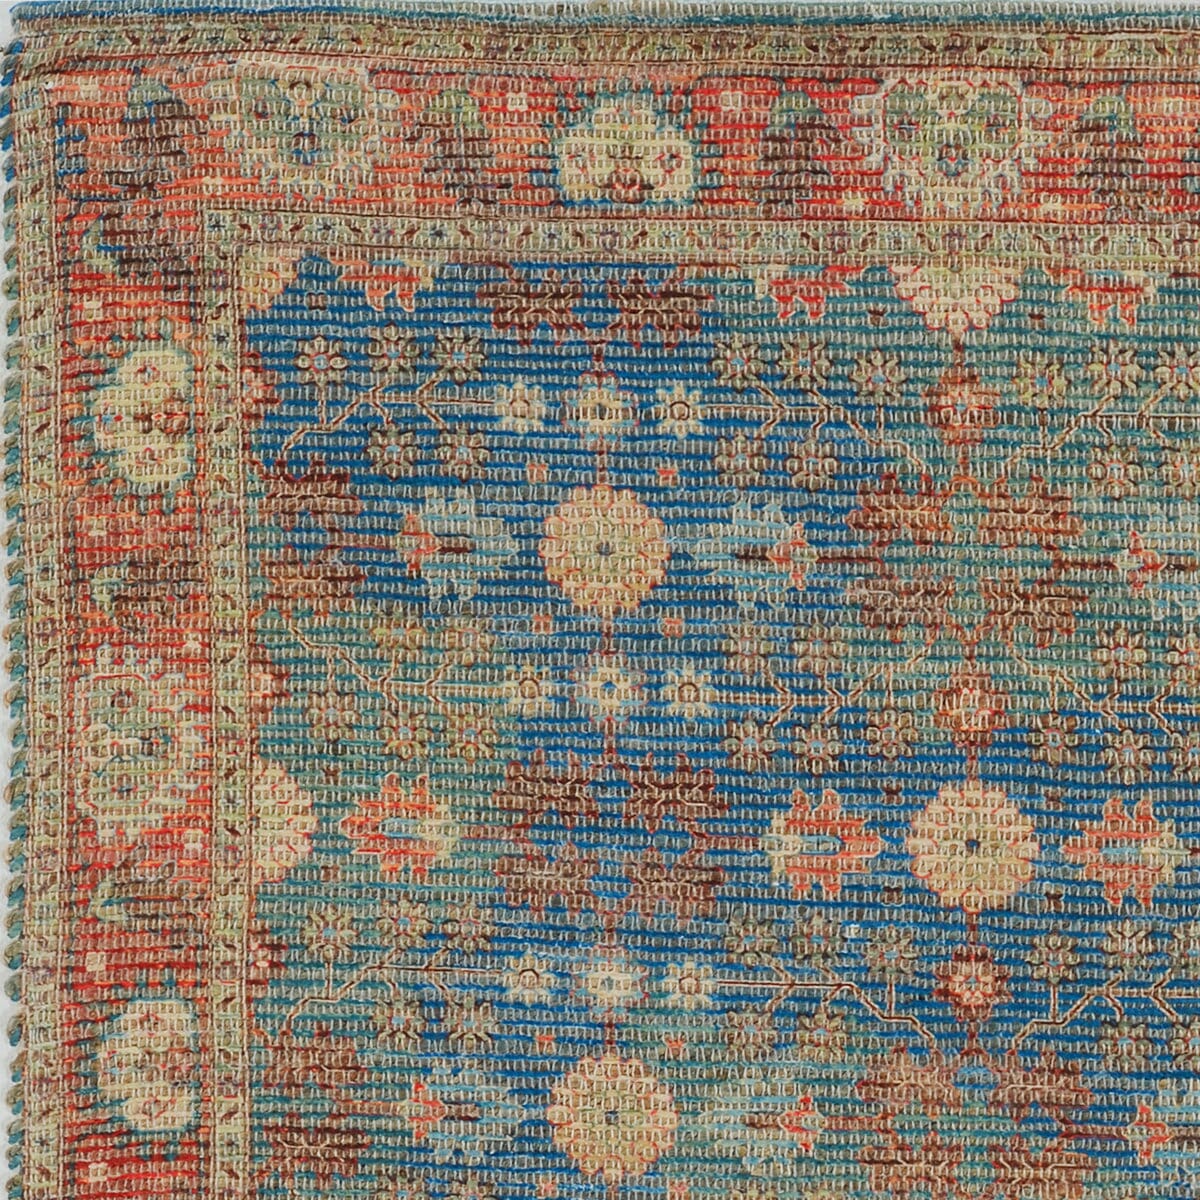 KAS Morris 2227 Traditions Blue / Red Area Rug